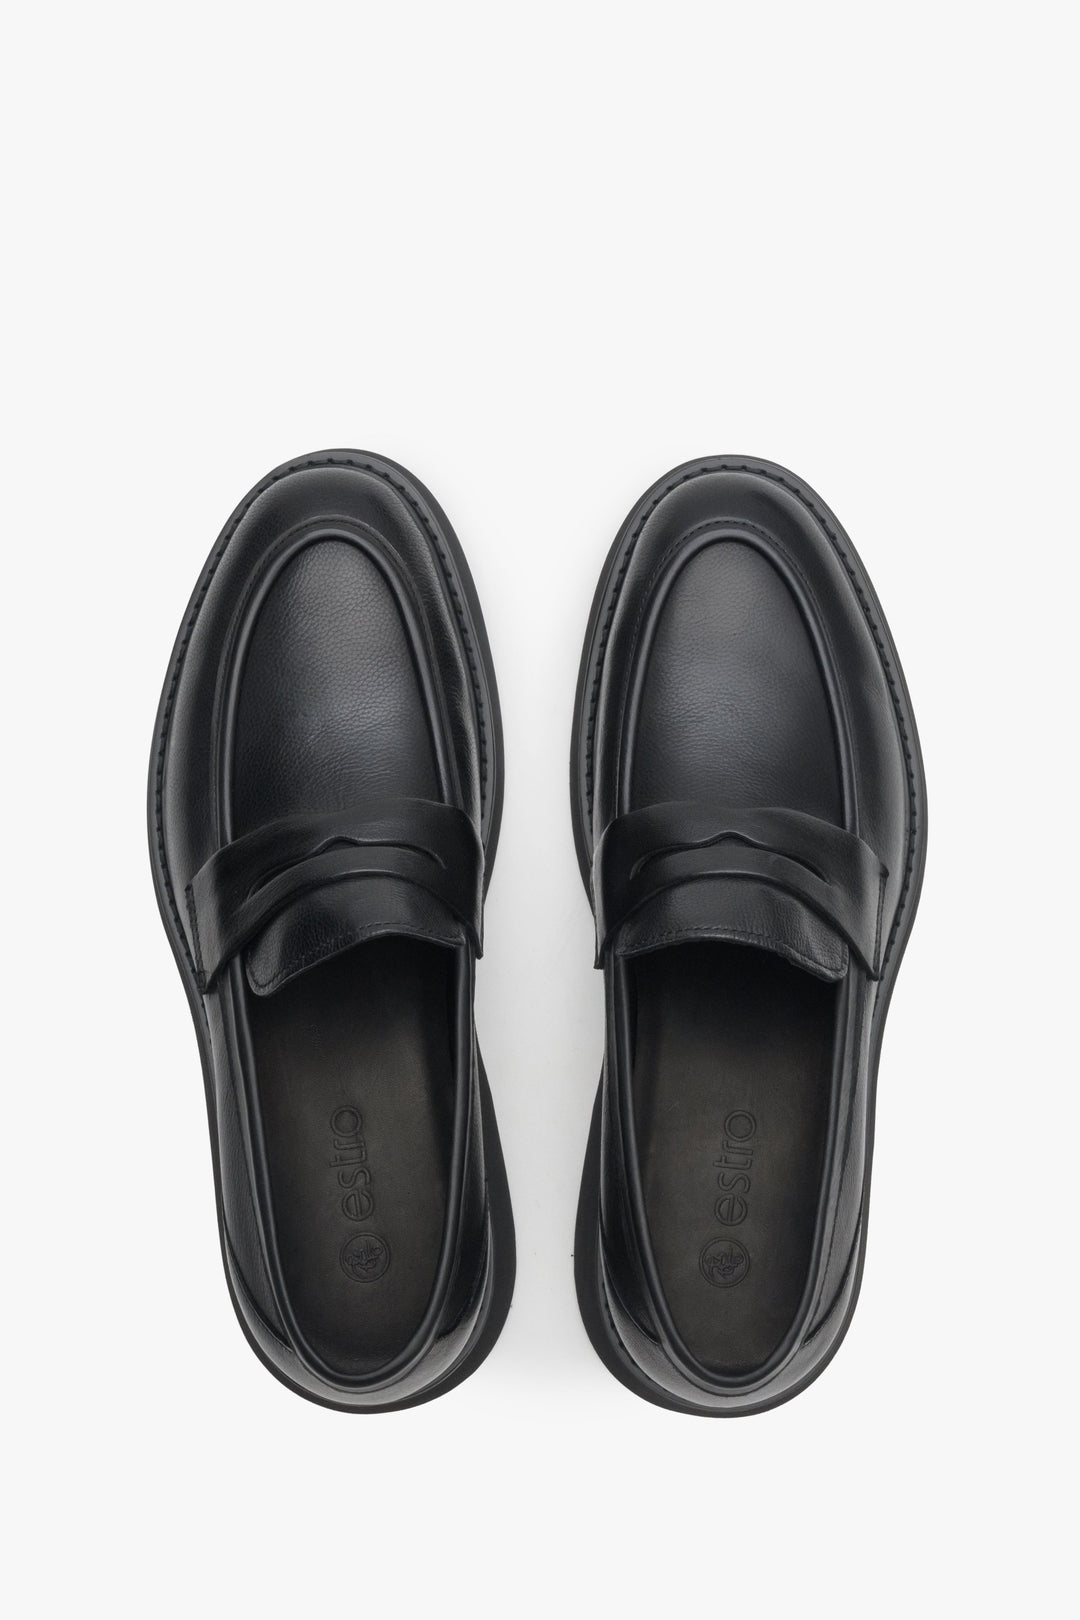 Men's black Estro loafers made of genuine leather - top view presentation of the model.